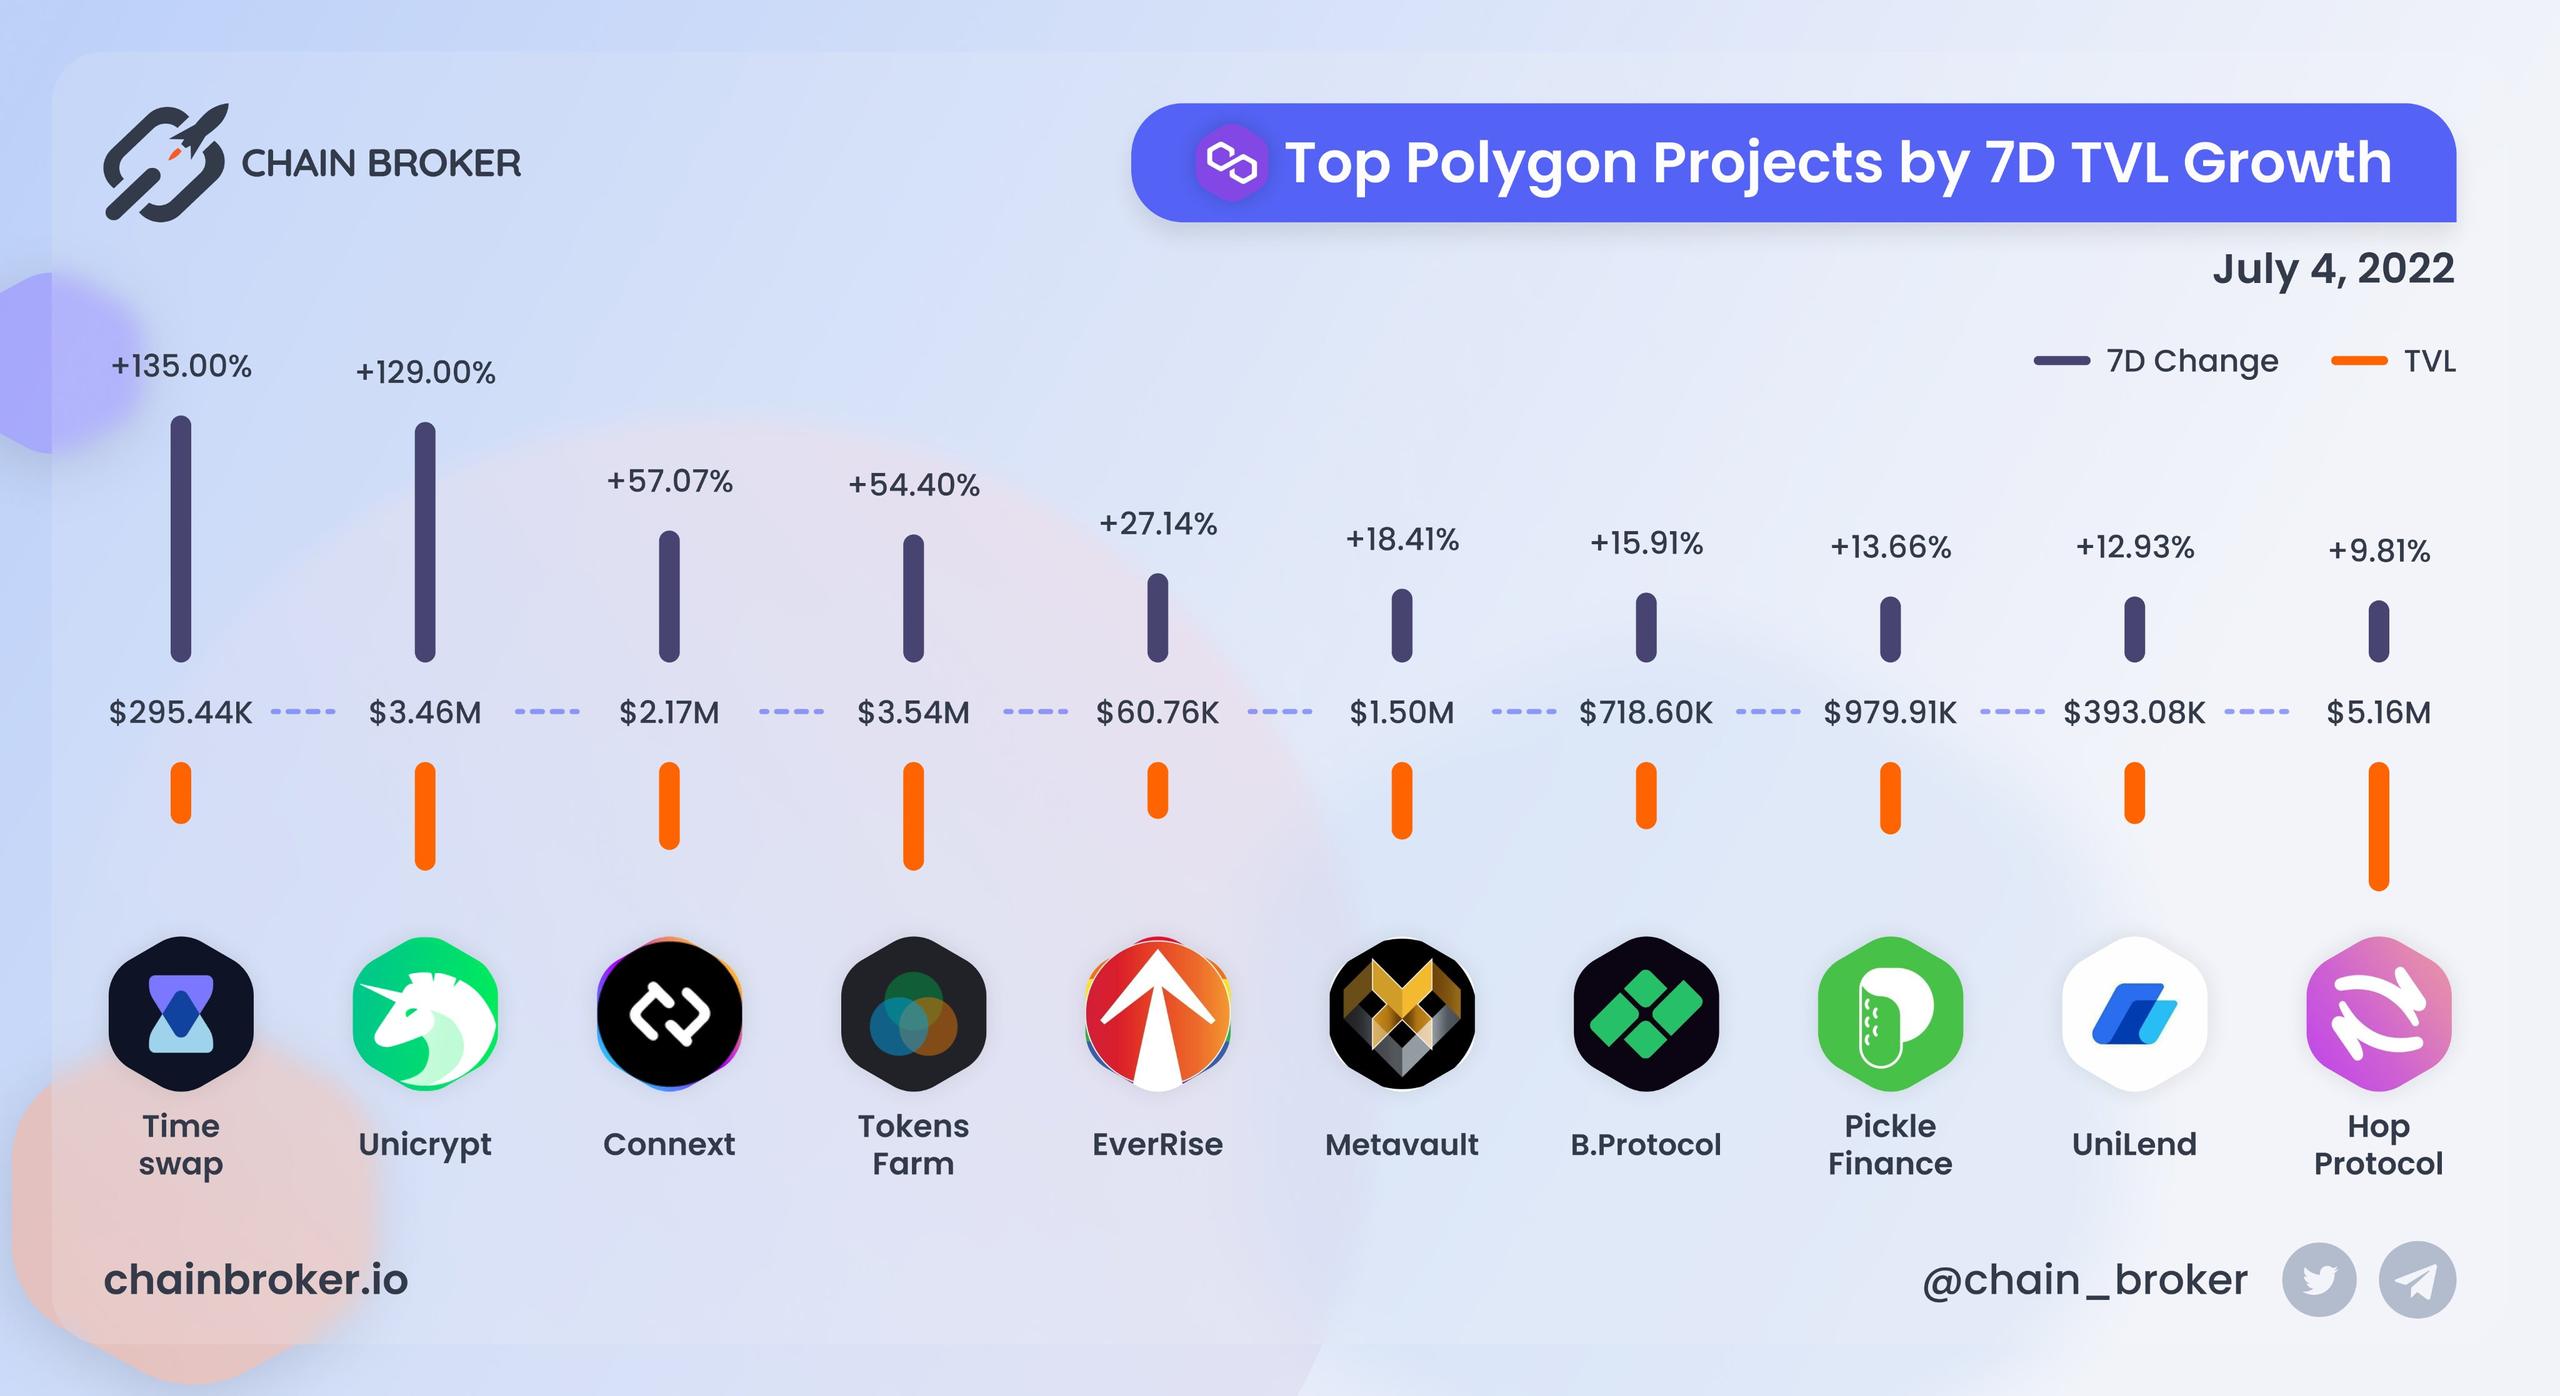 Top Polygon projects by 7D TVL growth